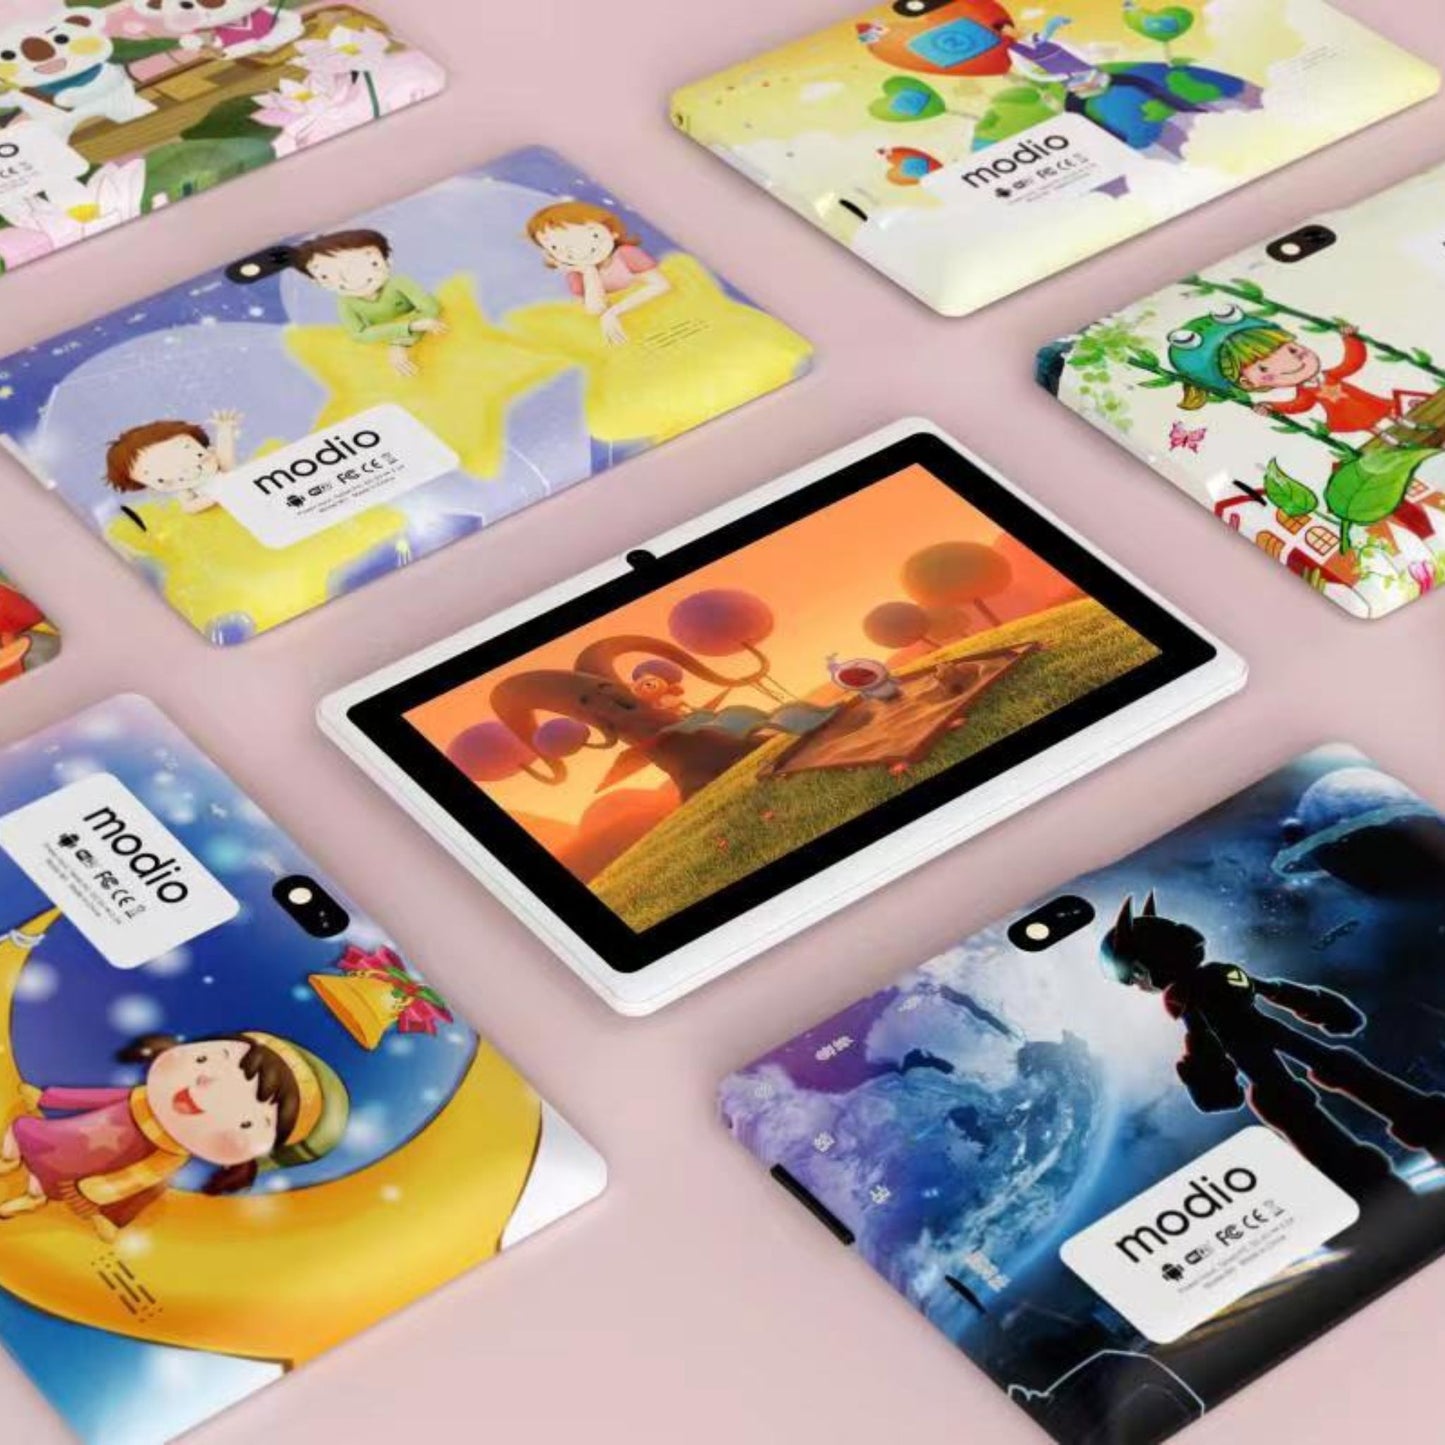 Modio M1 Tablet for Kids Dual Camera 7 inch display 16GB,5G WiFi Tablet PC 3000 mAh Battery